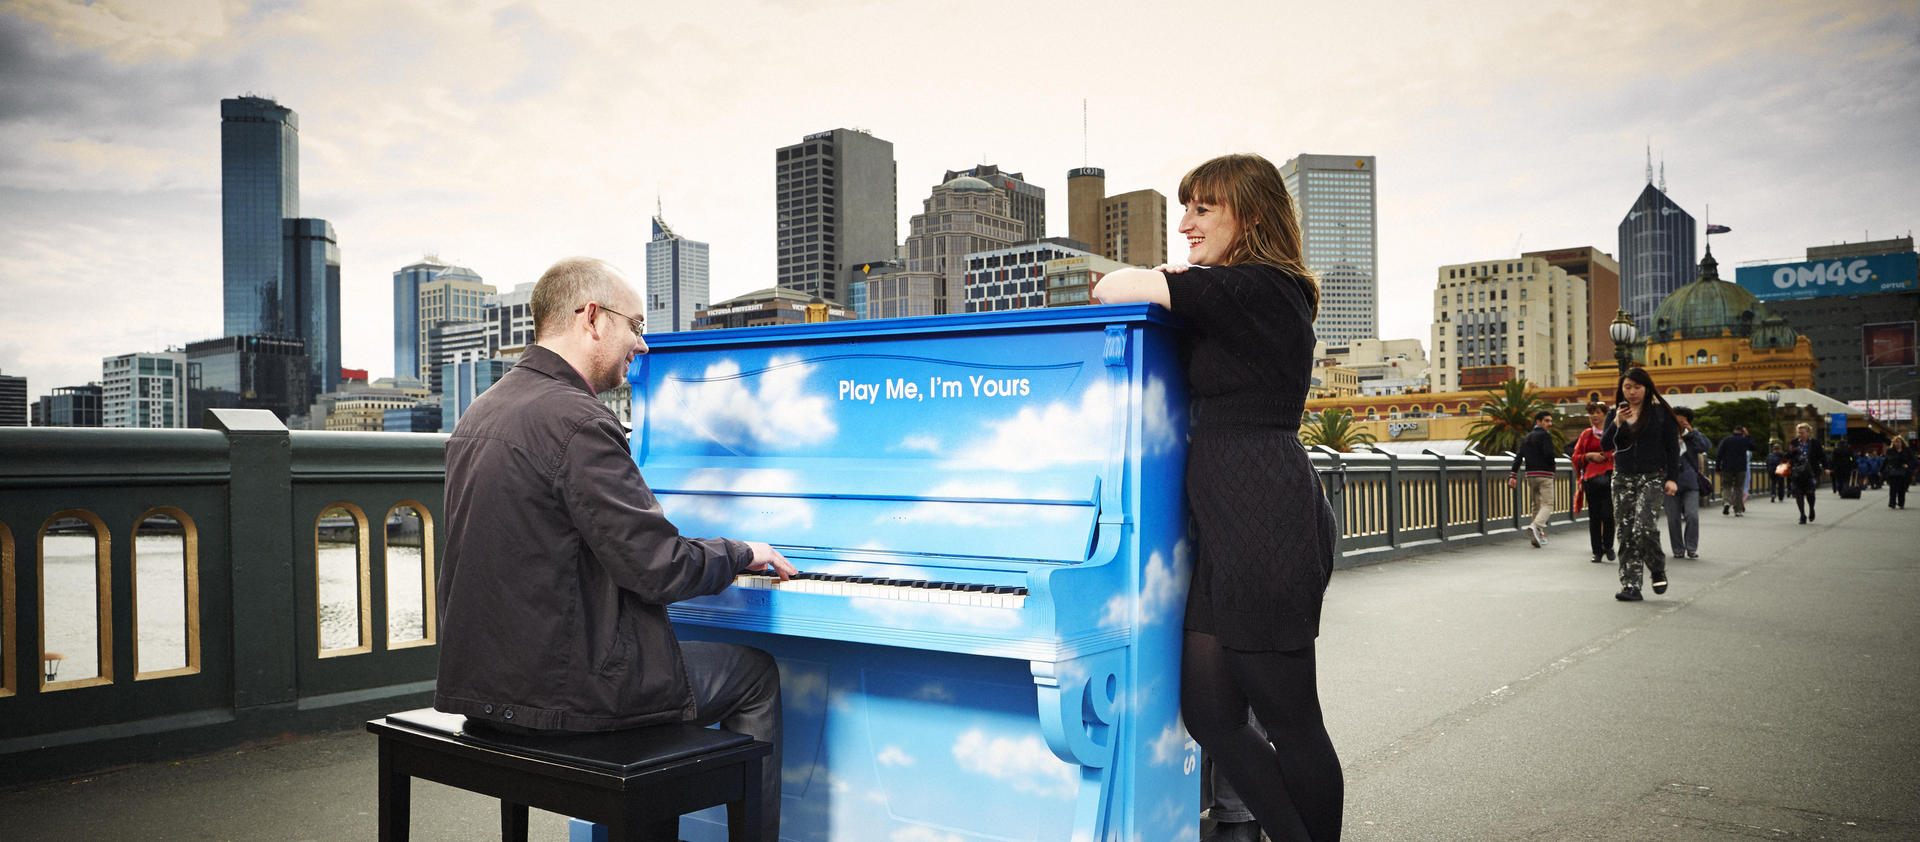 "Play Me, I'm Yours" brings musical spontaneity to Melbourne's streets.